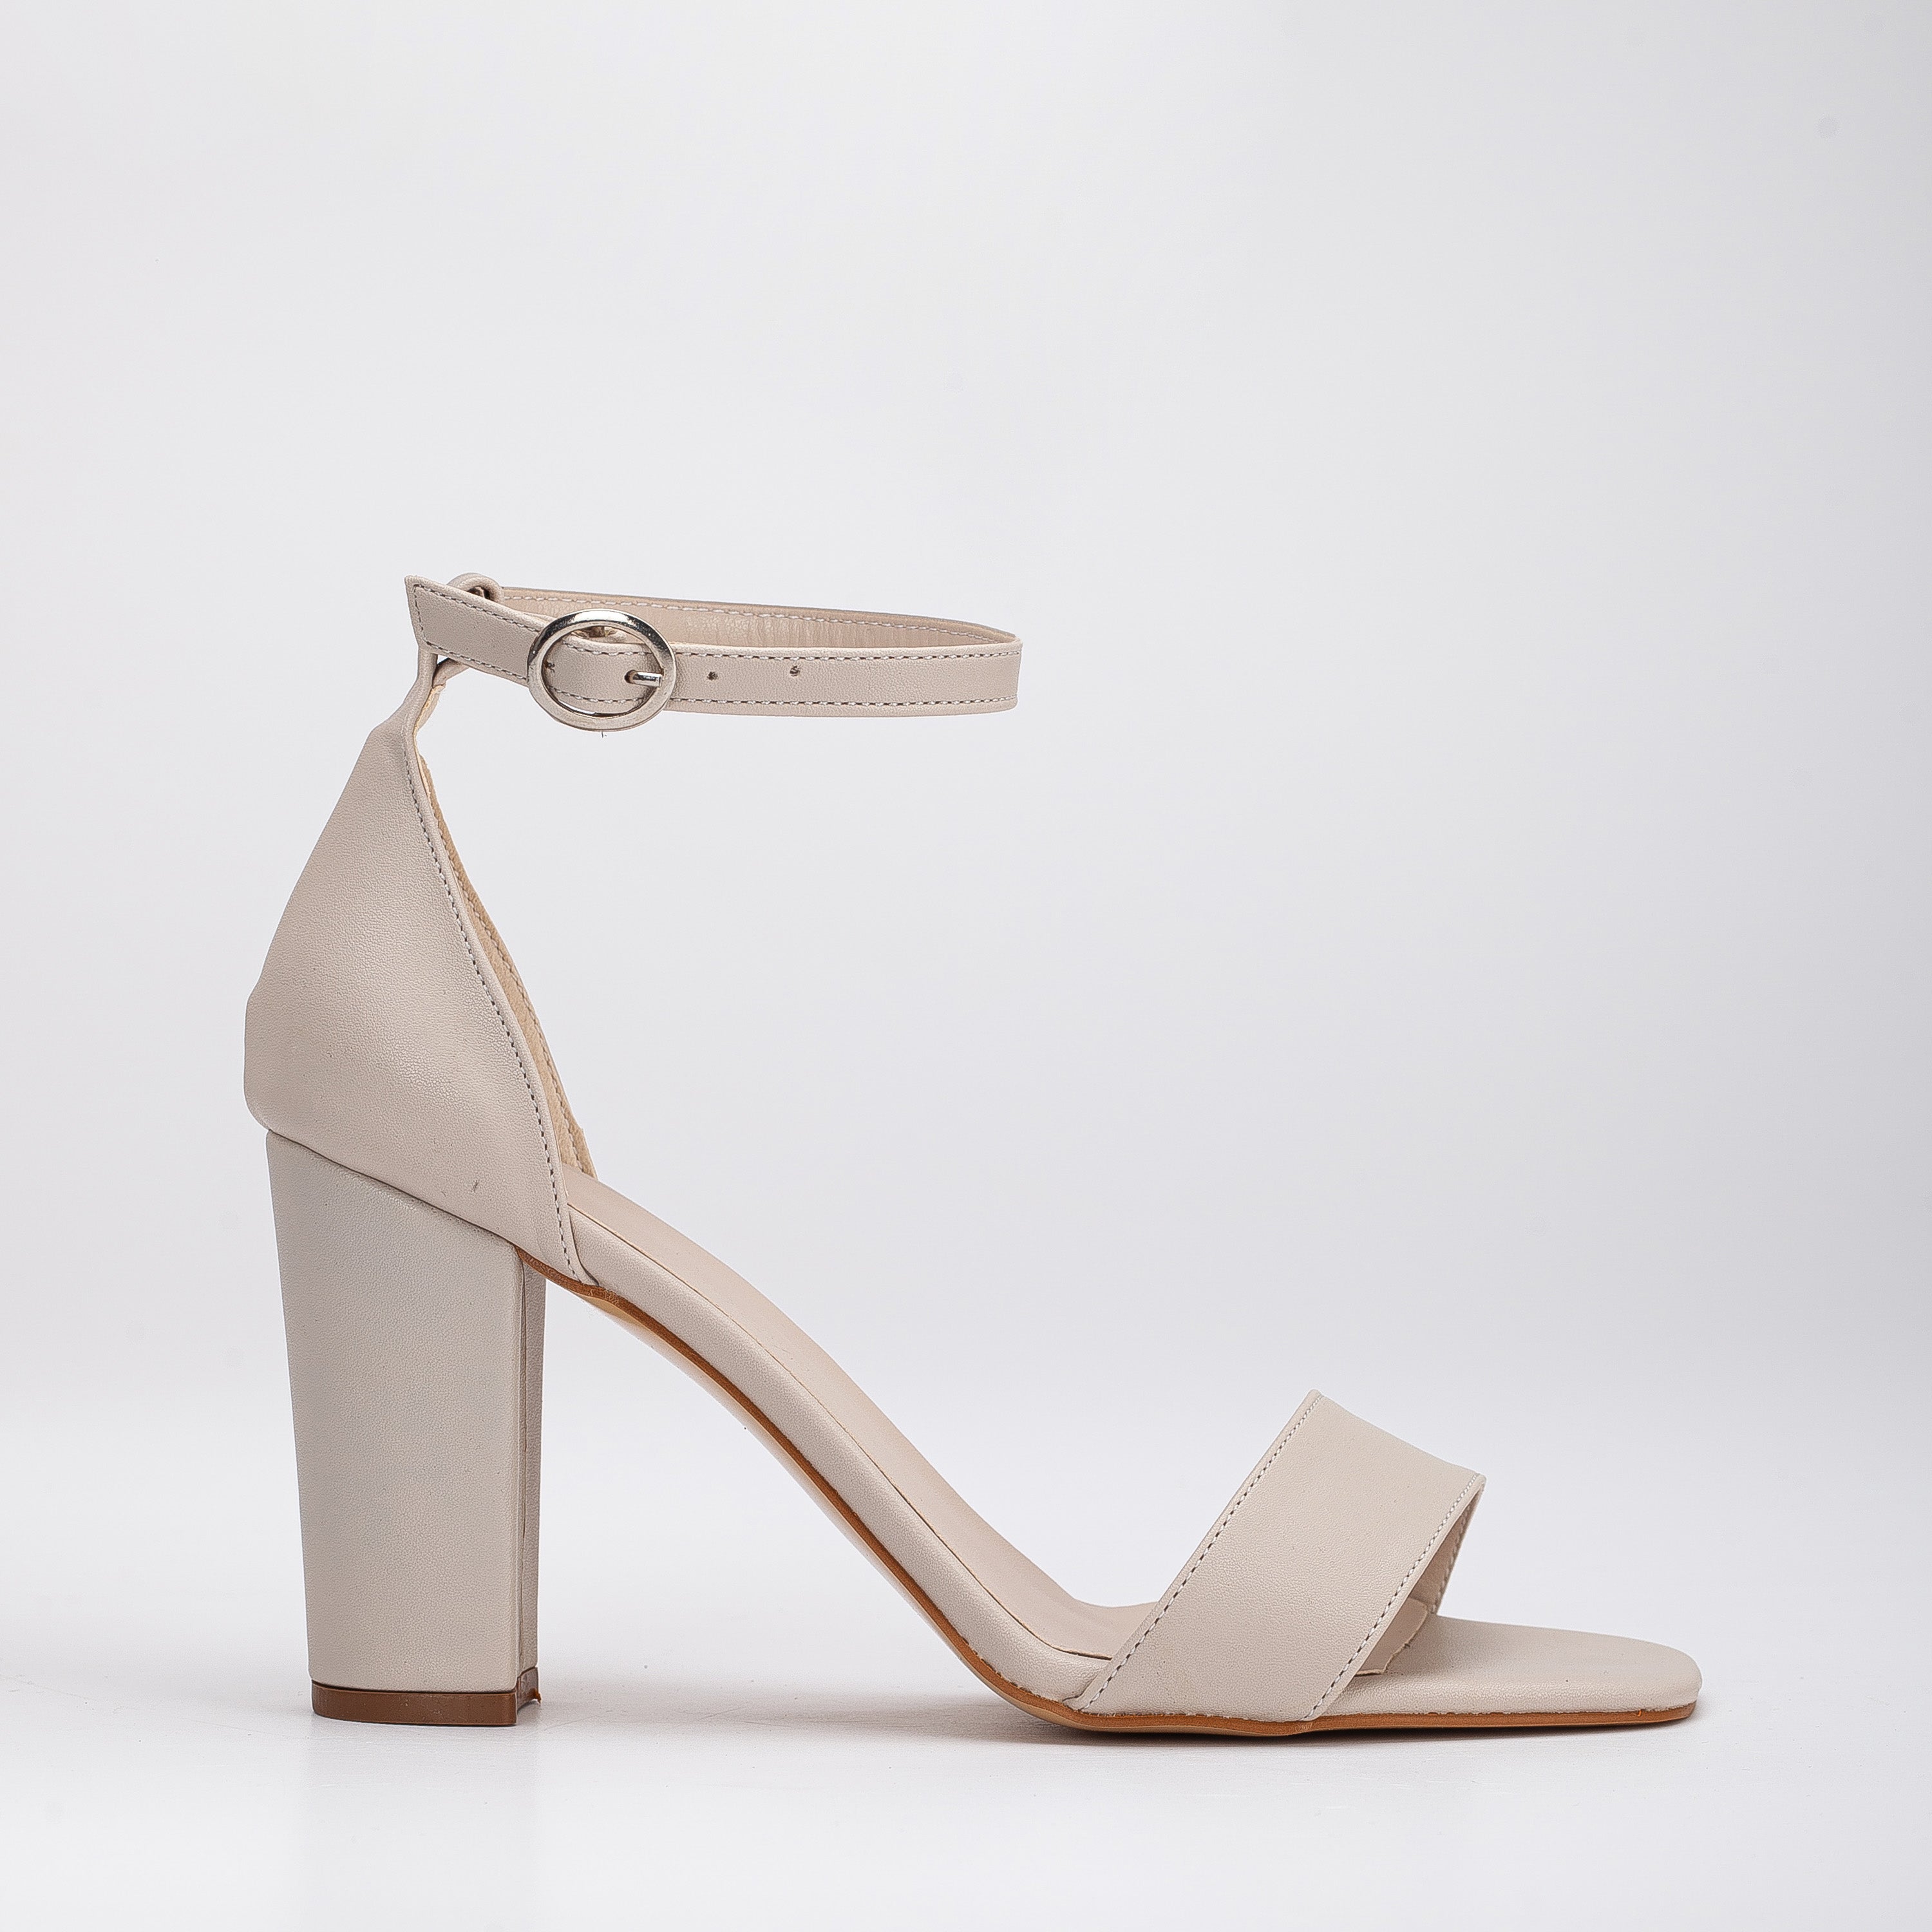 Essential Beige Ankle Strap Heels - All Shoes | Red Dress